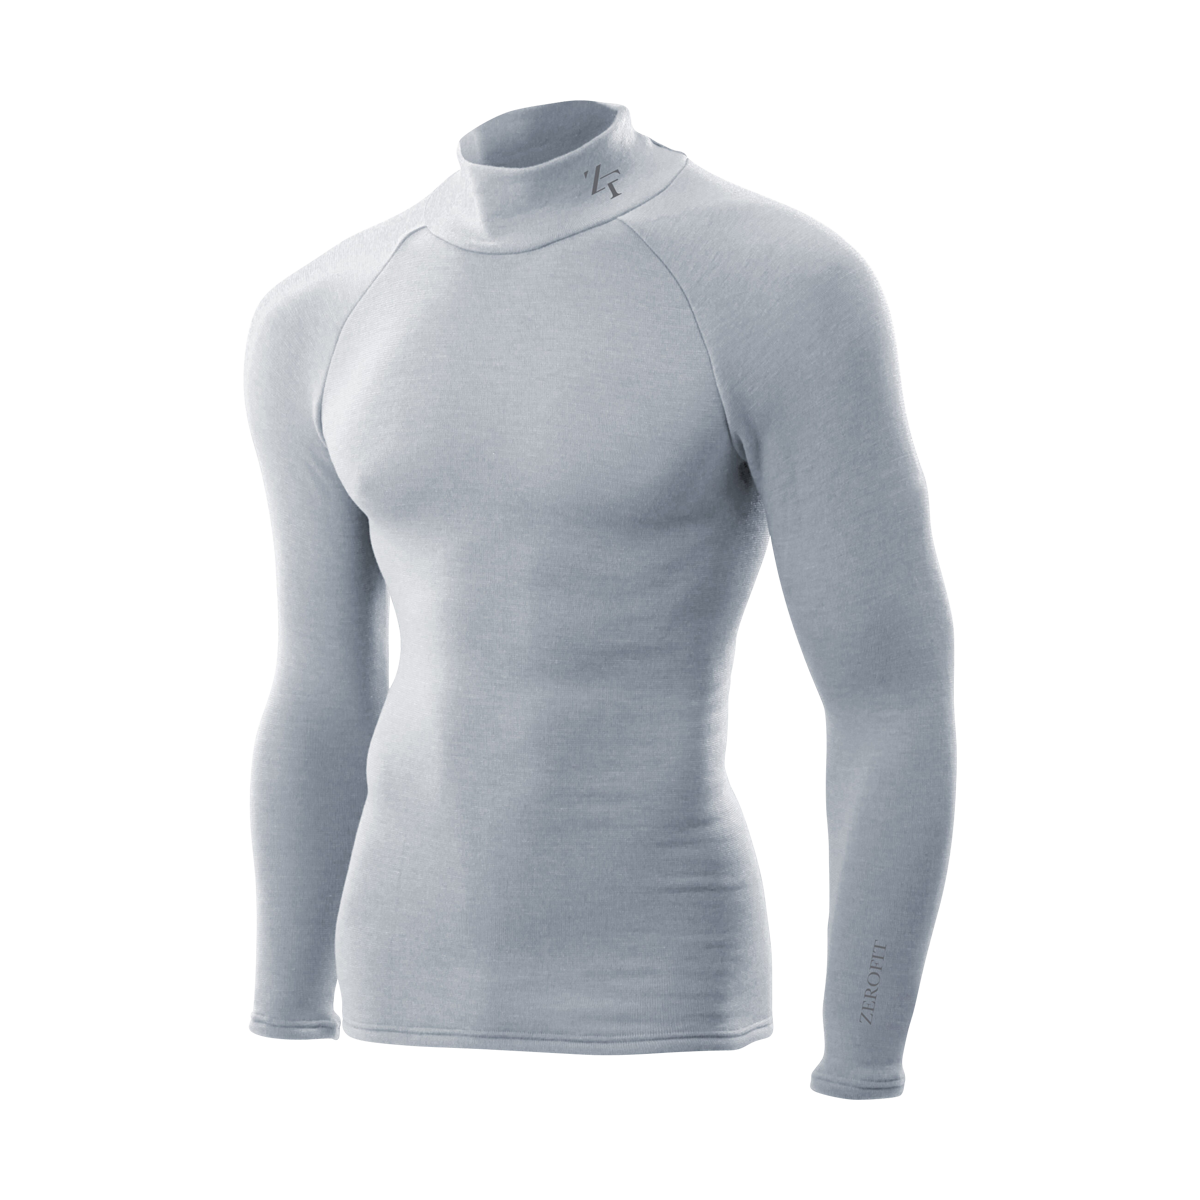 Men's Thermal Underwear Set, Winter Base Layer Sport Long Johns Top &  Bottom Suit Compression Cold Weather Gear for Skiing, Grey, M price in UAE,  UAE